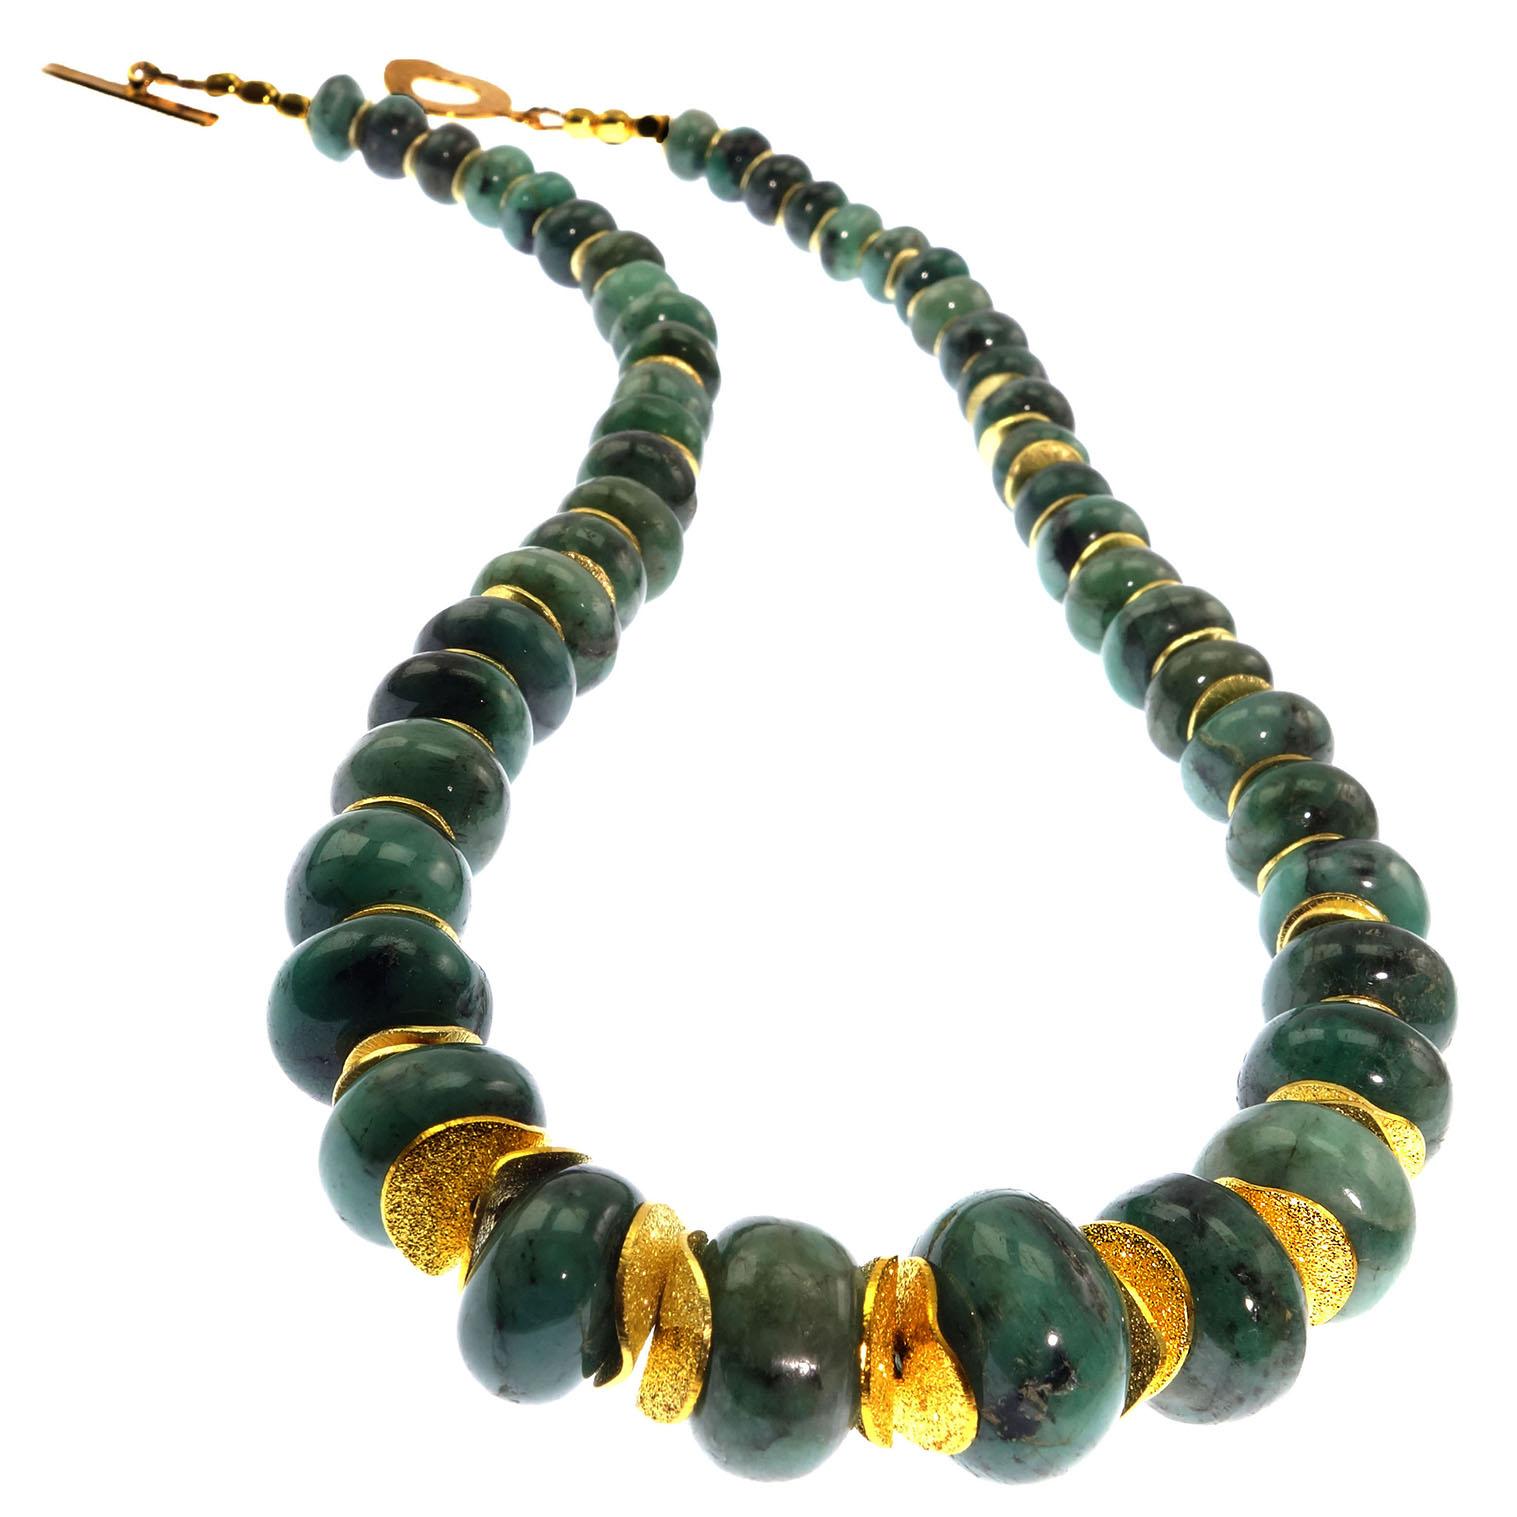  Necklace of Highly Polished Graduated  Green Emerald Rondels with Gold Accents